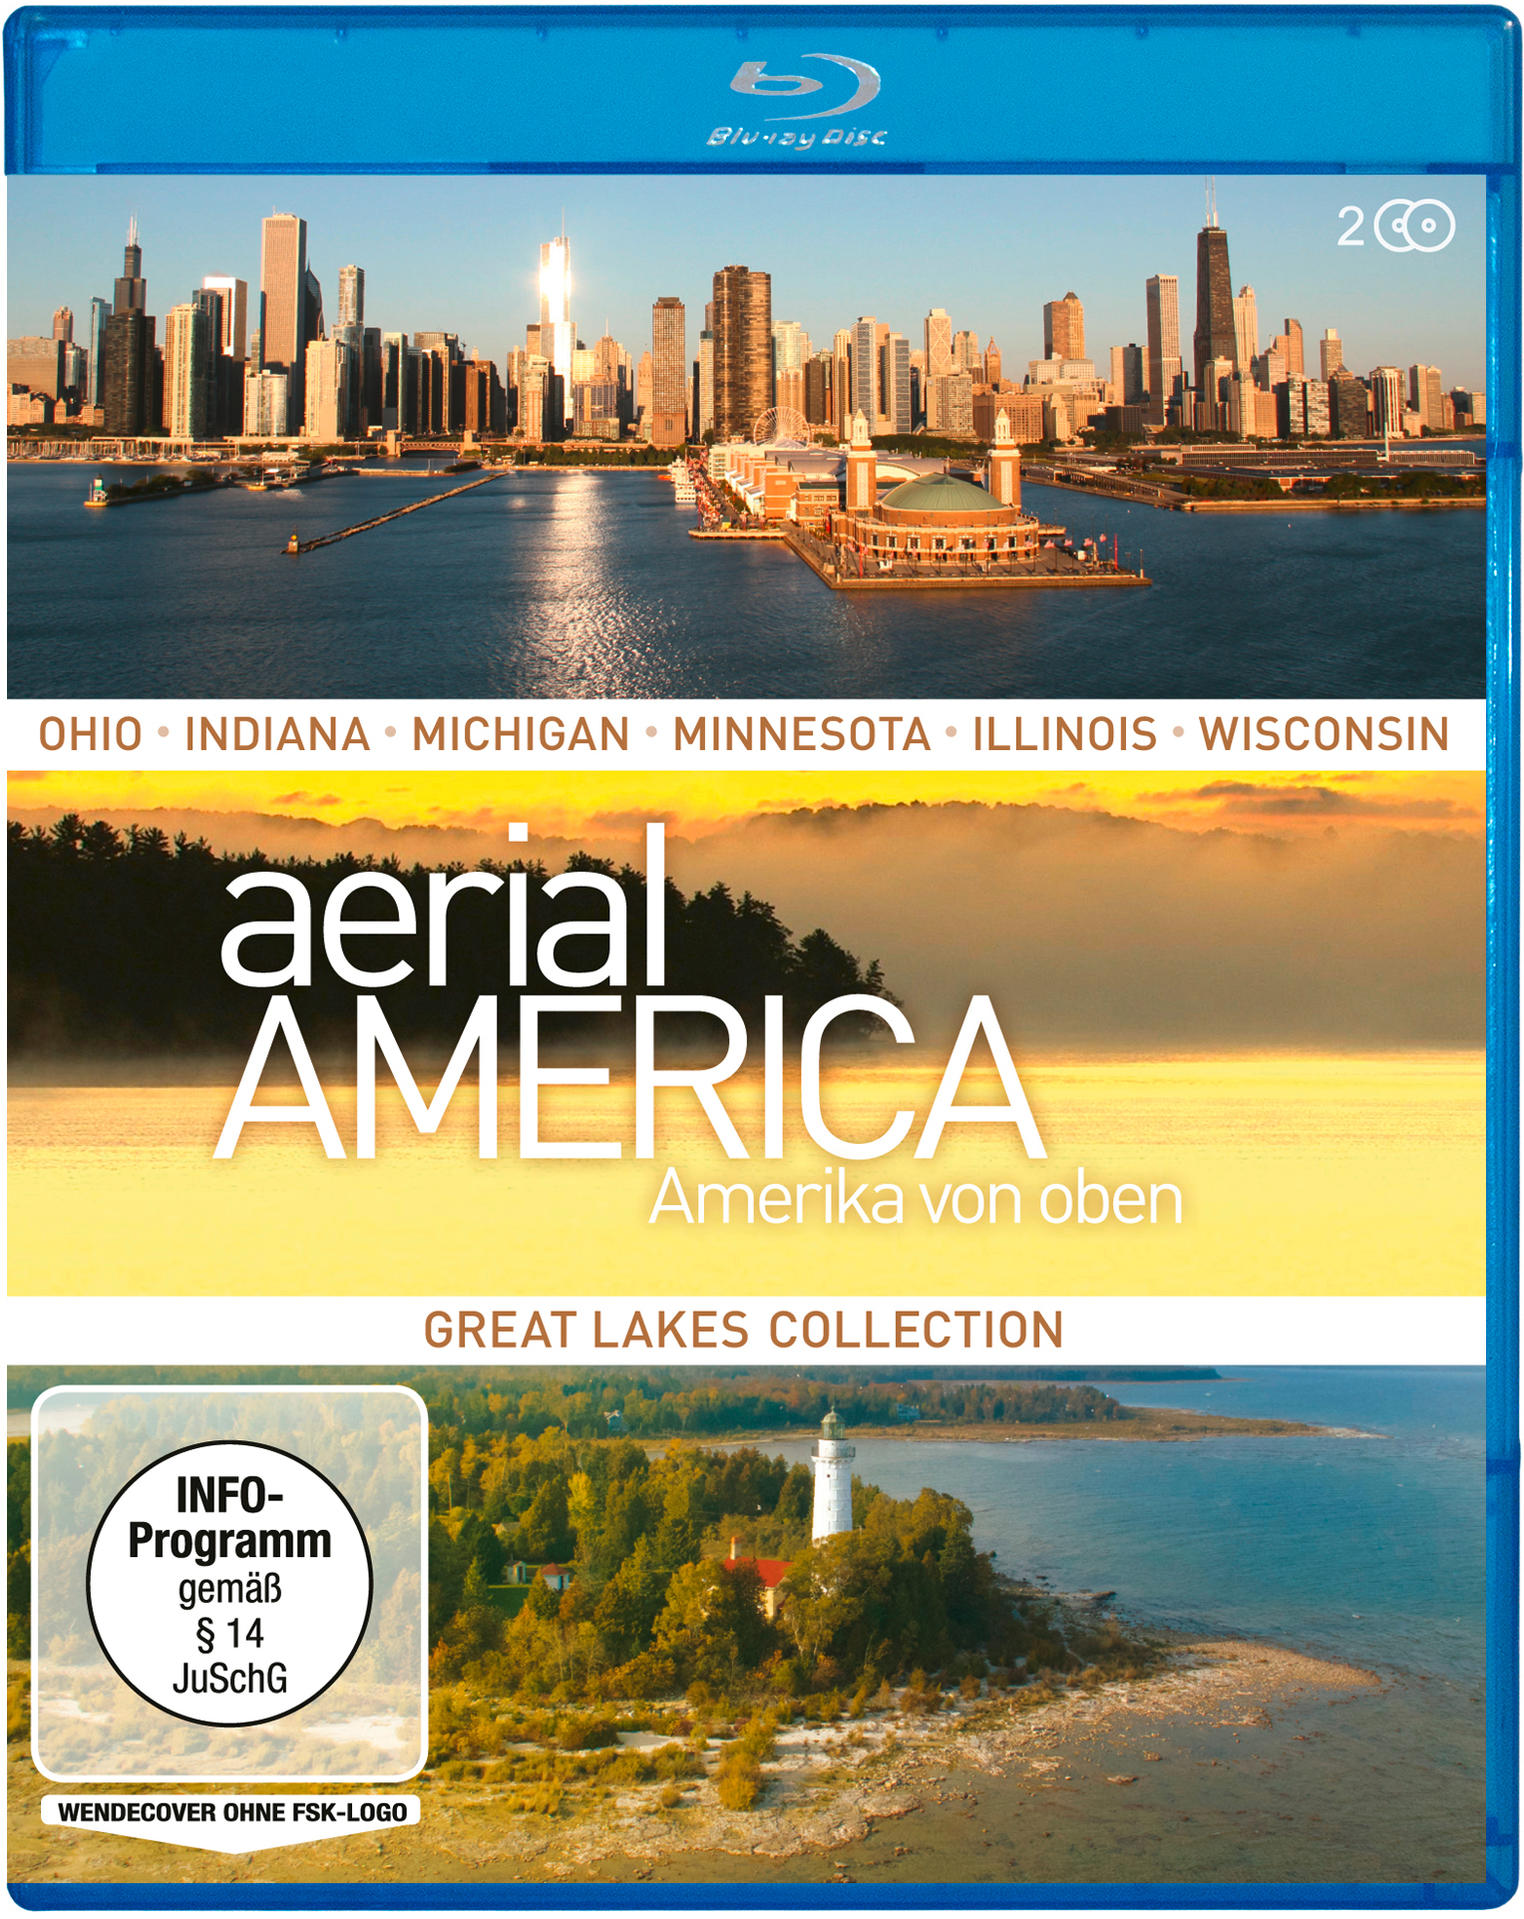 Great - America Amerika Lakes von oben: Collection Aerial Blu-ray